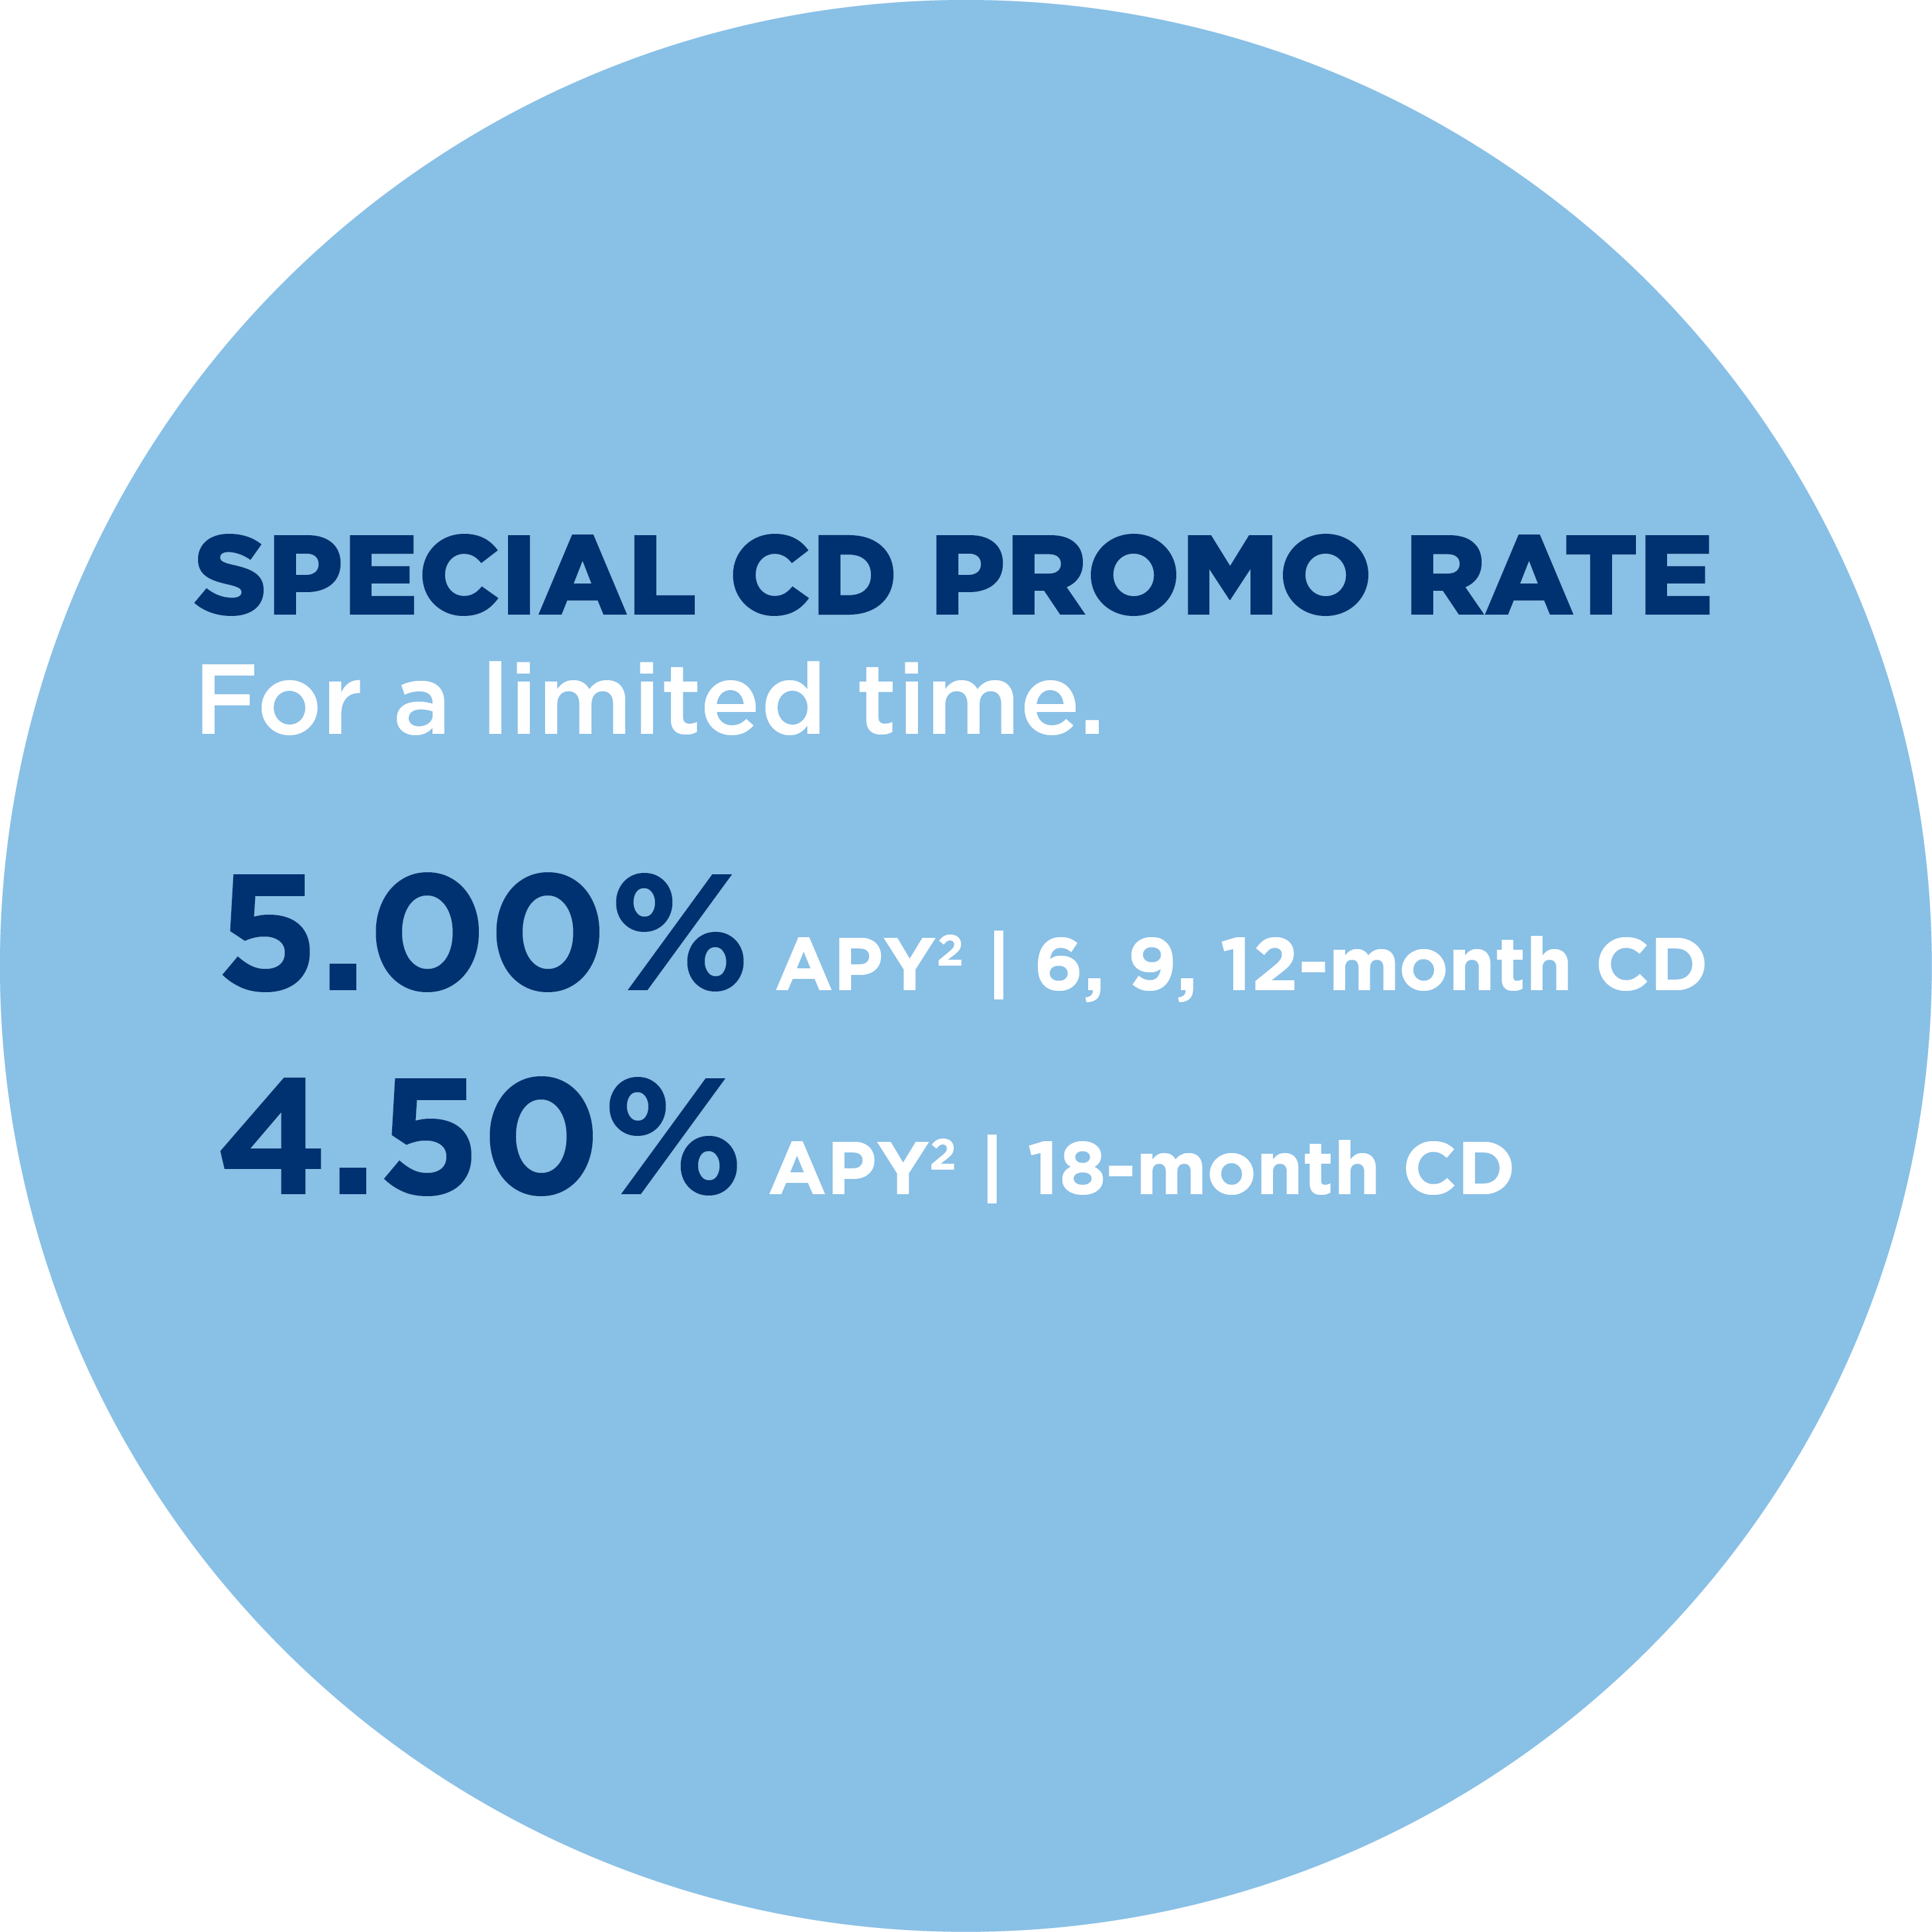 Special CD Promo Rate for a limited time. 5.00% APY(2) FOR 6, 9, 12-Month CD and 4.50% APY(2) for 18-month CD